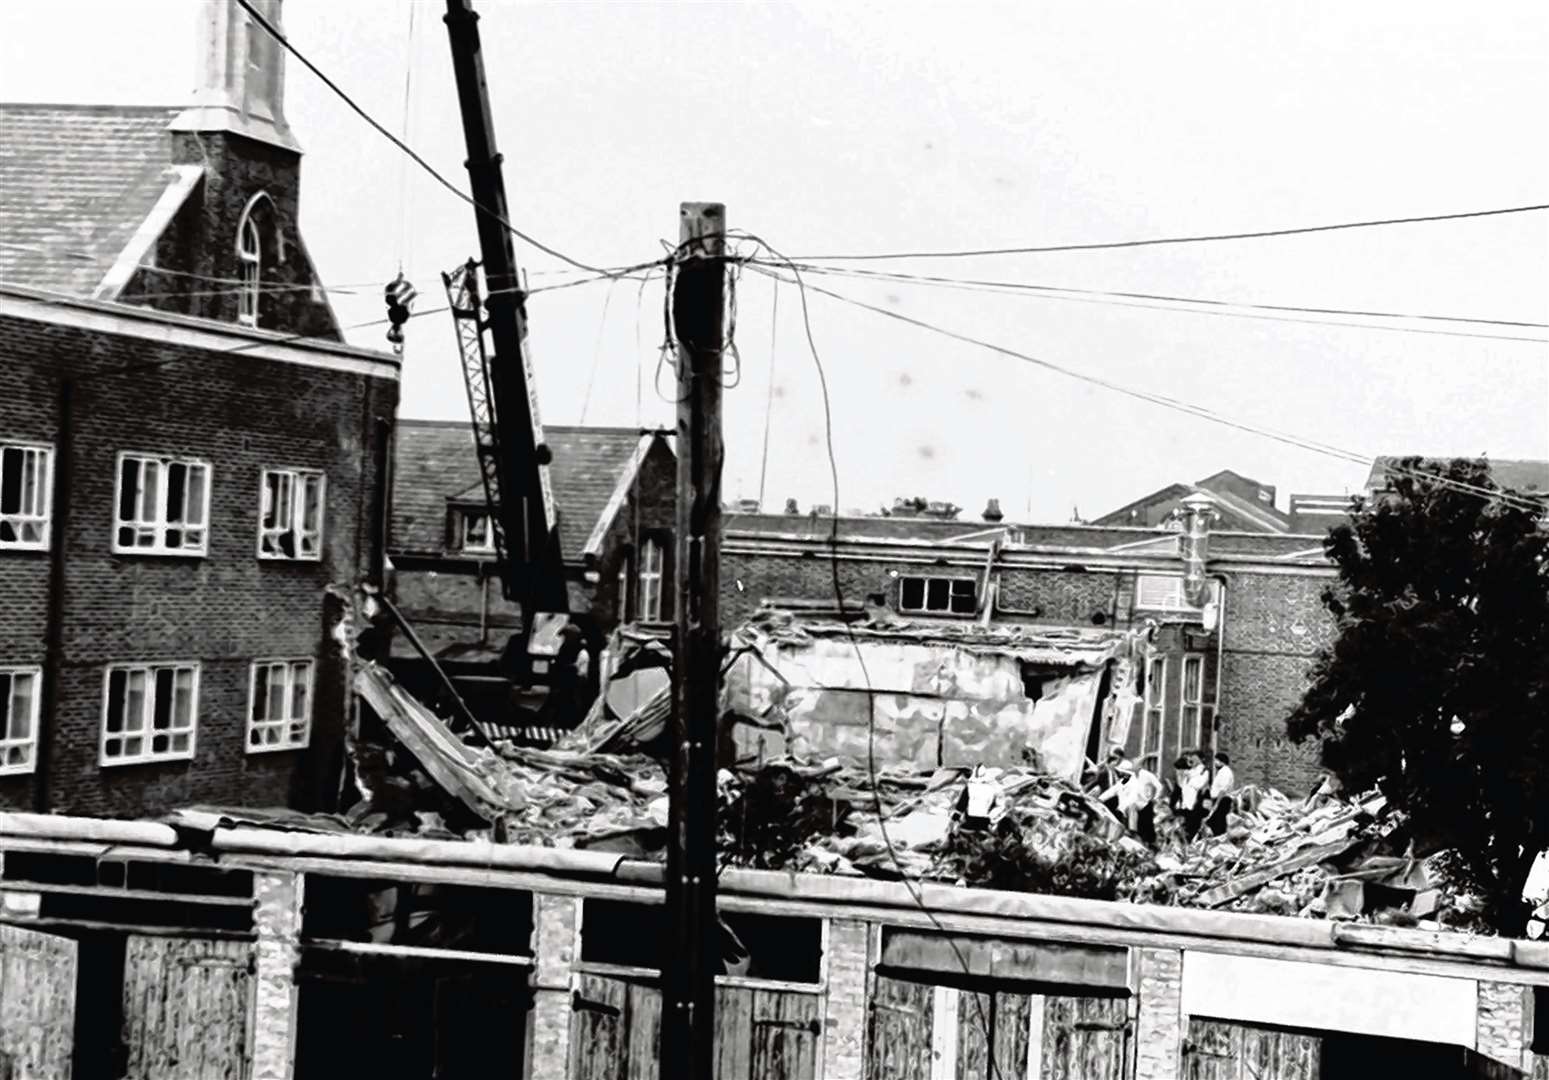 The aftermath of the IRA bombings at the Royal Marines School of Music building. Credit: Mike Pett